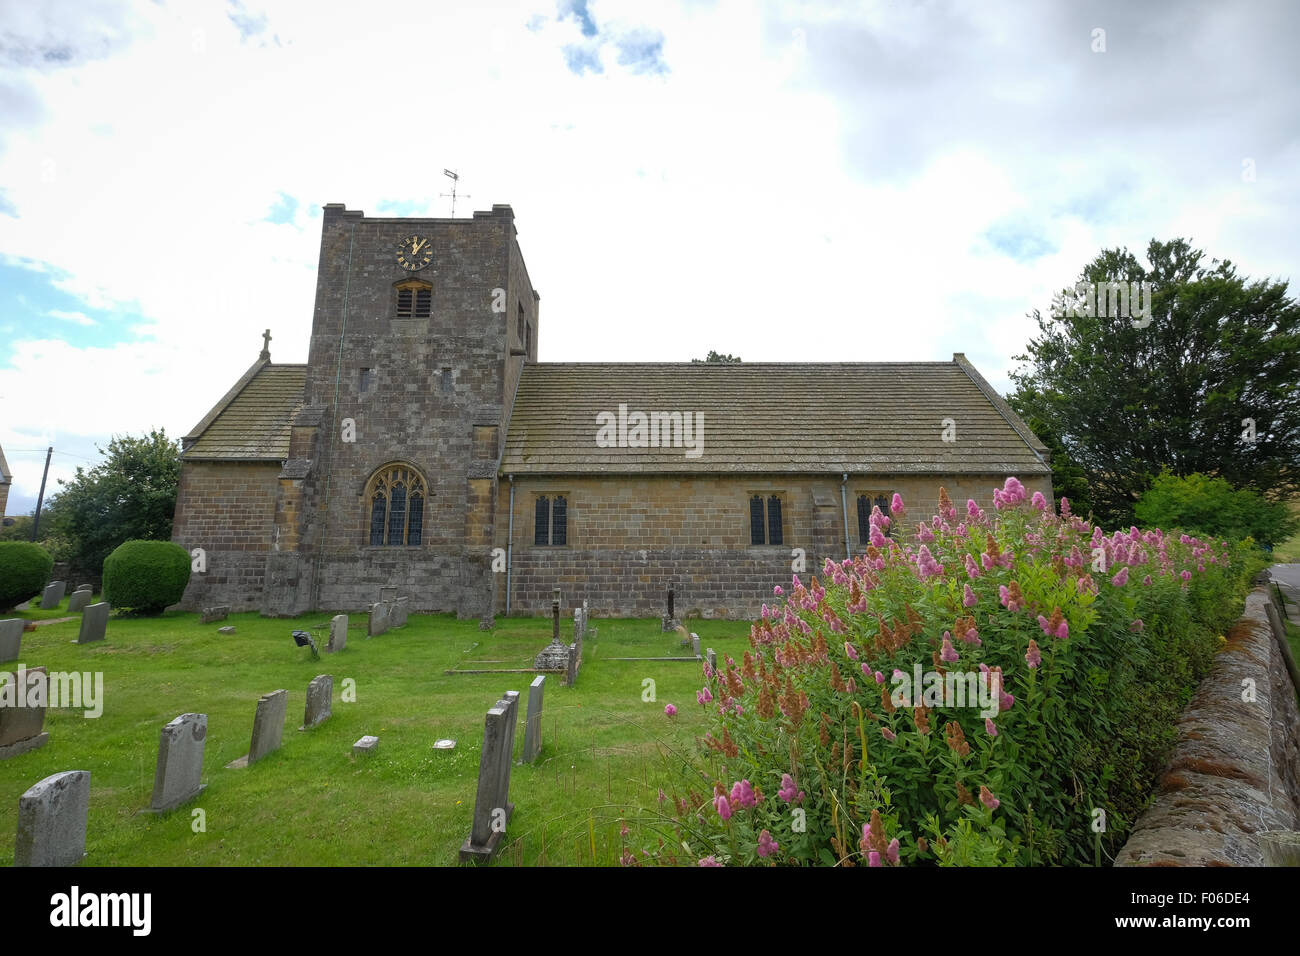 St Mary's Church in the village of Goathland in the North Yorkshire Moors. The village featured in the TV show Heartbeat Stock Photo